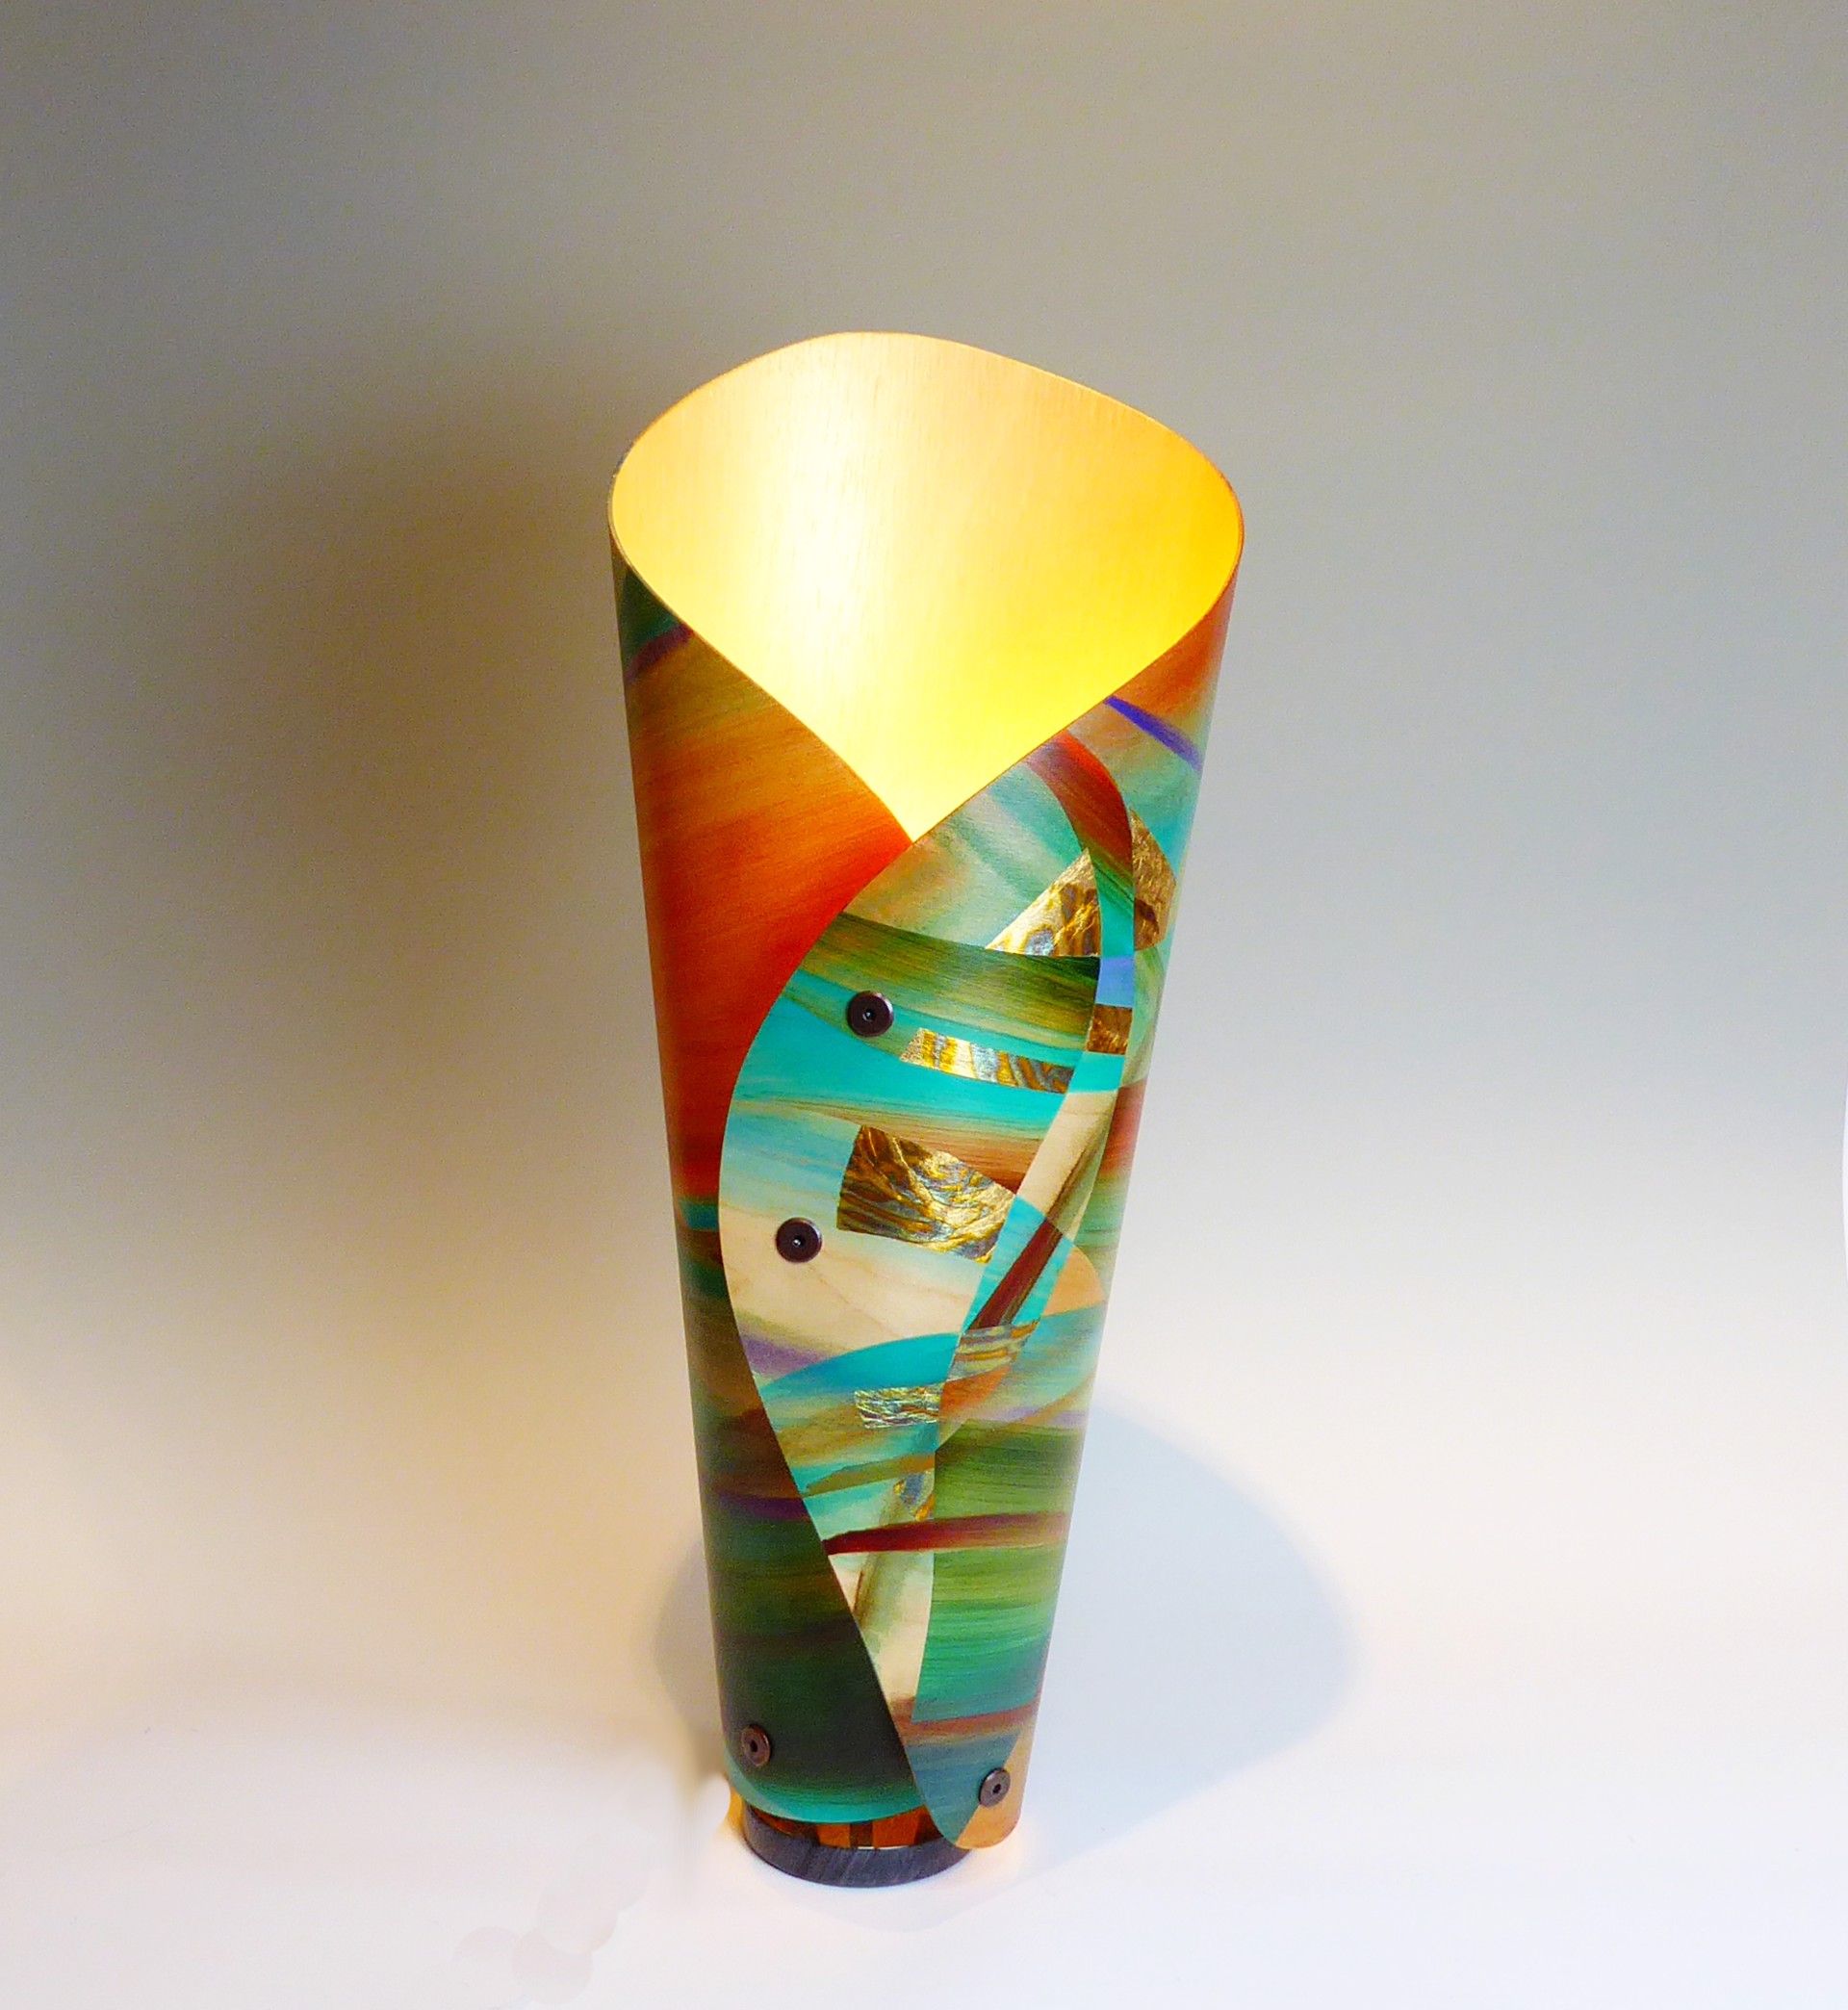 Turquoise River Lamp by Cynthia Duff